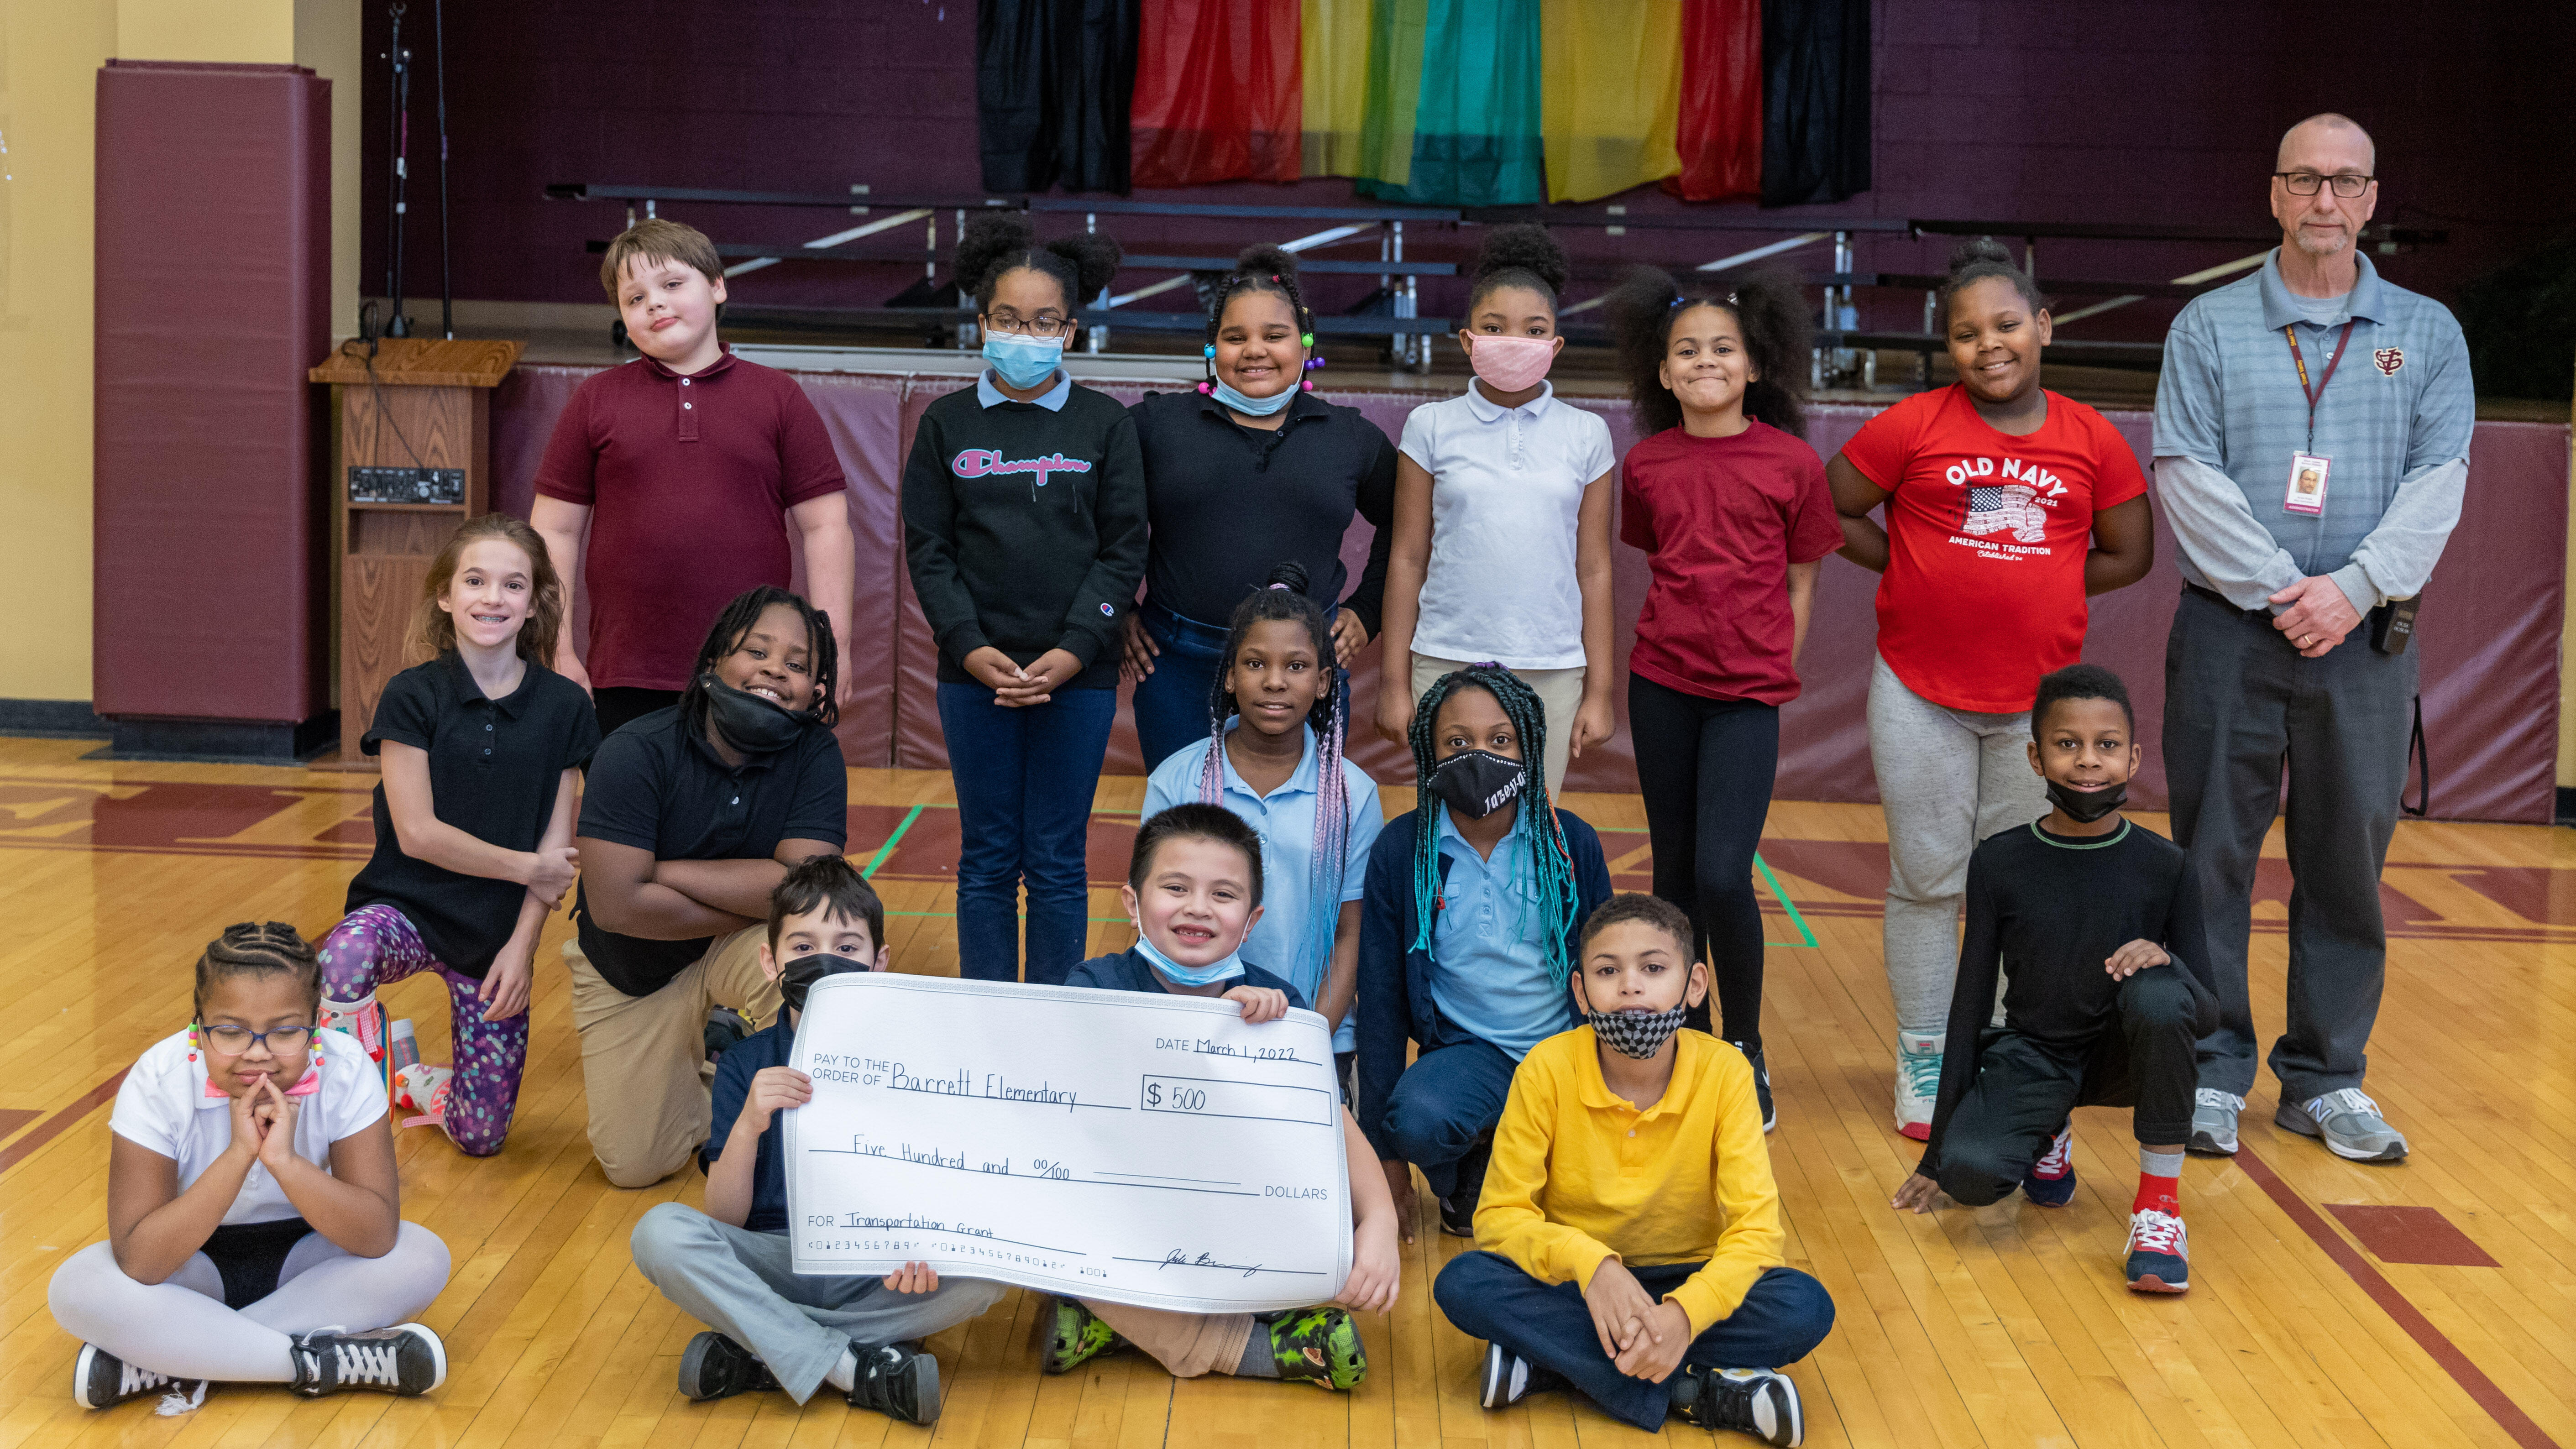 Students in Barrett's Kids of Steel program pose for a picture with a check for $500 that will help them compete in the Kids Marathon.